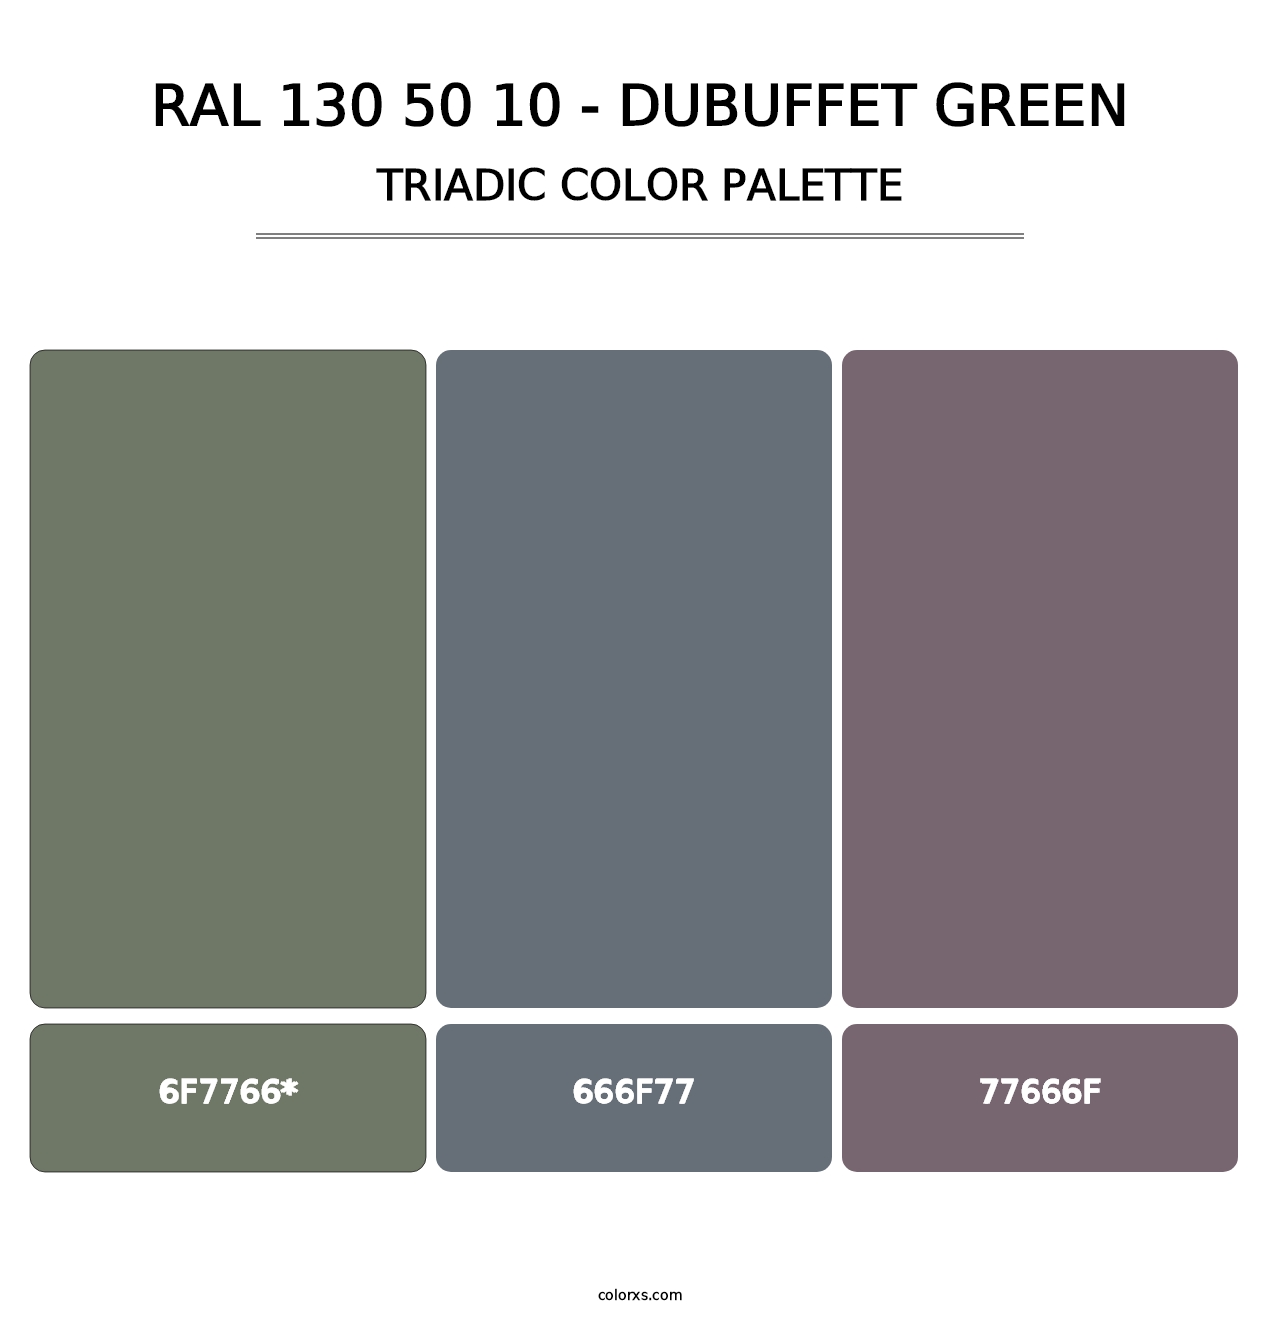 RAL 130 50 10 - Dubuffet Green - Triadic Color Palette